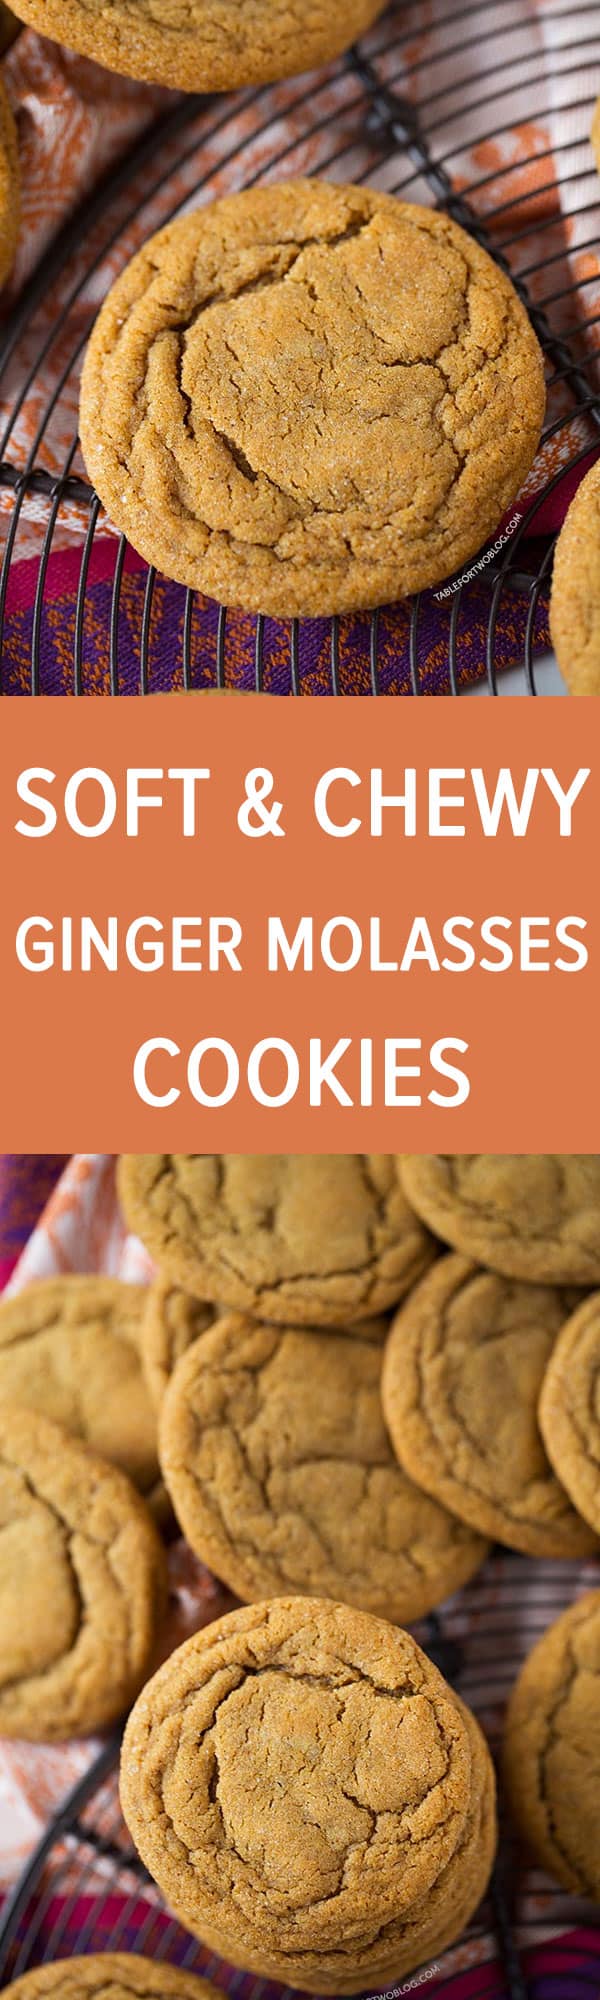 These soft and chewy ginger molasses cookies are guaranteed going to be the softest and chewiest cookies you'll ever make!